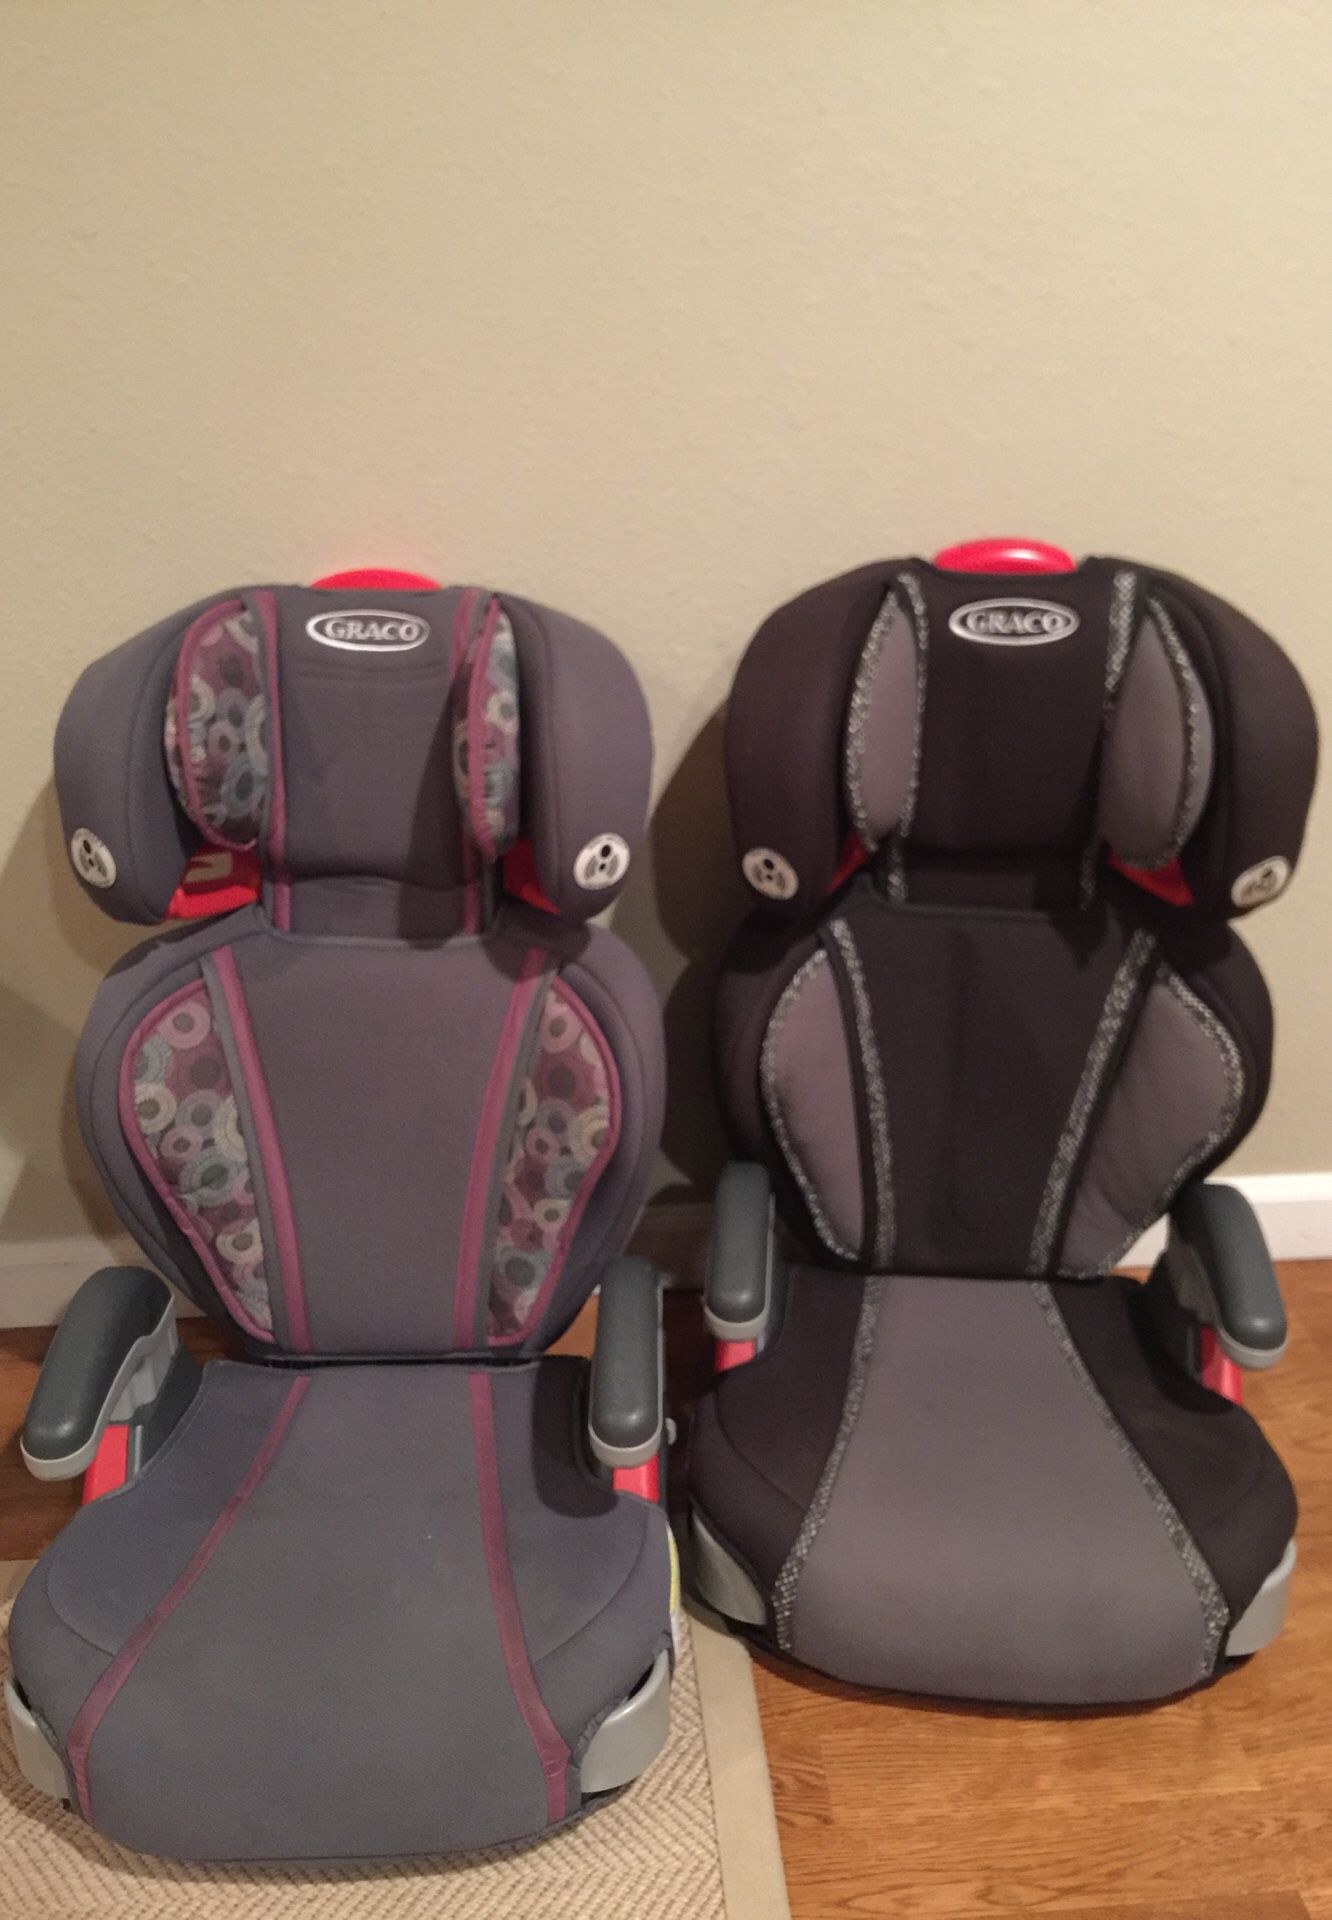 Booster seats, removable backs, Graco